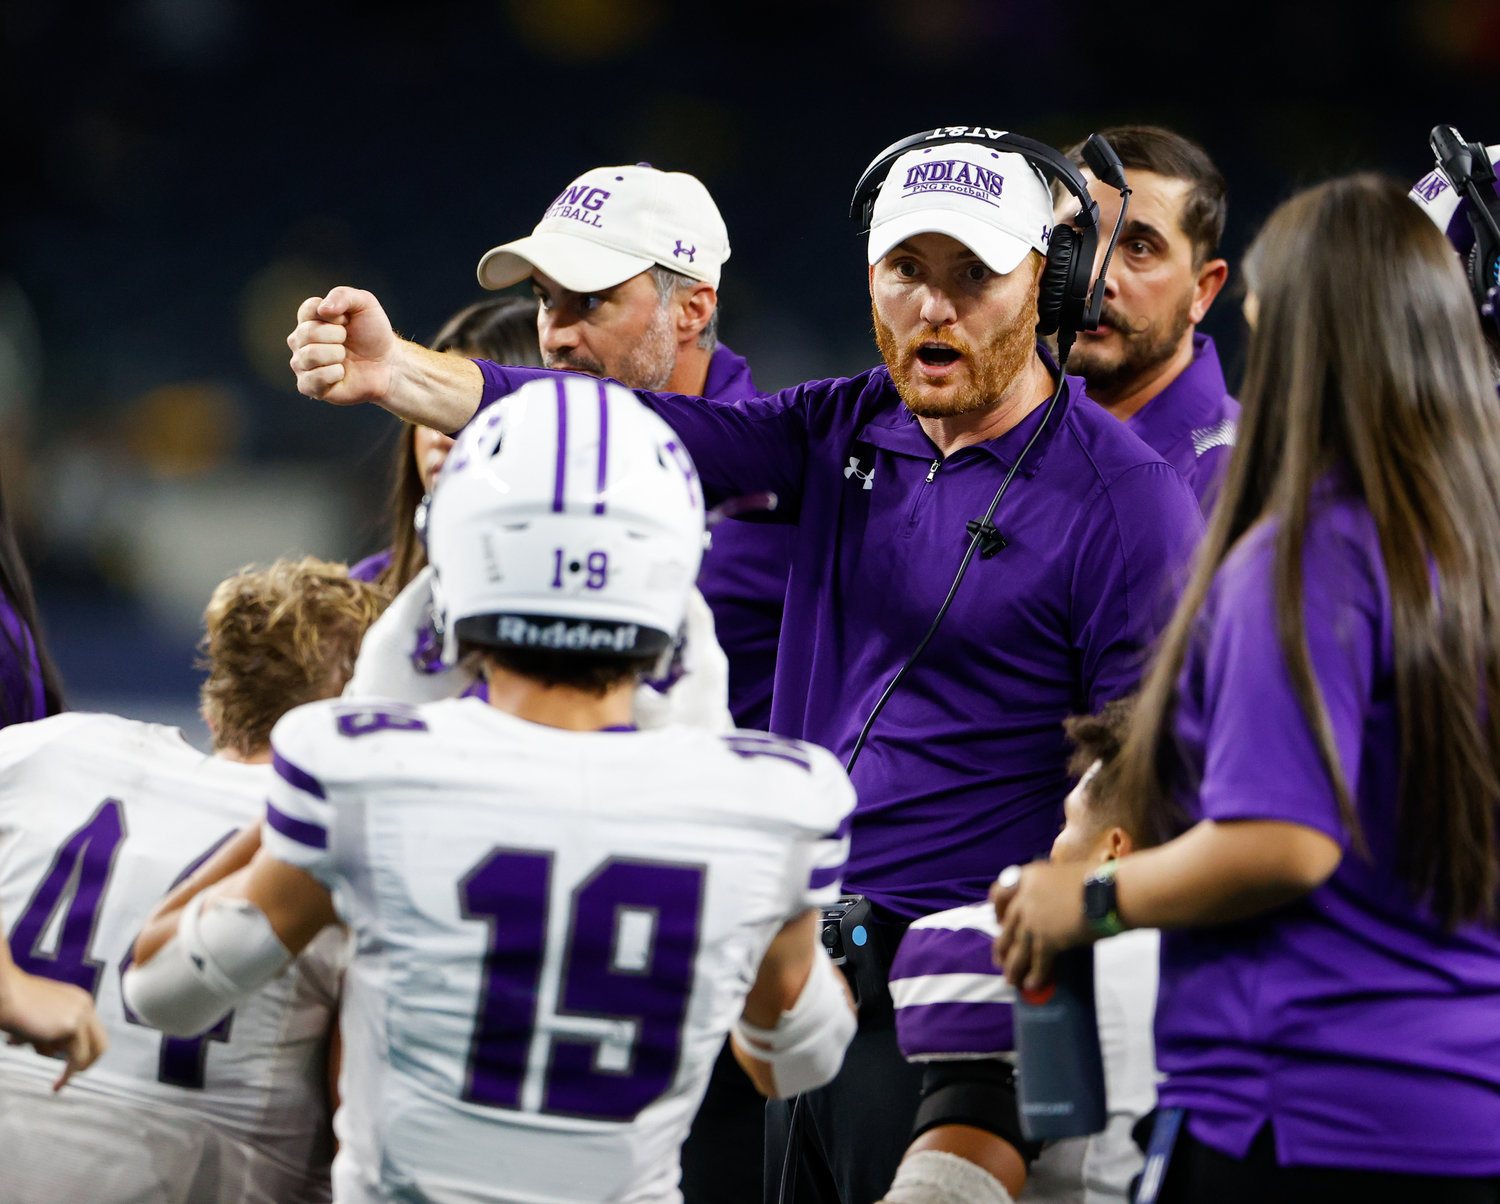 Port Neches-Groves head coach Jeff Joseph (center) talks with his team during a timeout in the Class 5A Division II football state championship game between South Oak Cliff and Port Neches-Groves in Arlington, Texas, on Dec. 16, 2022.